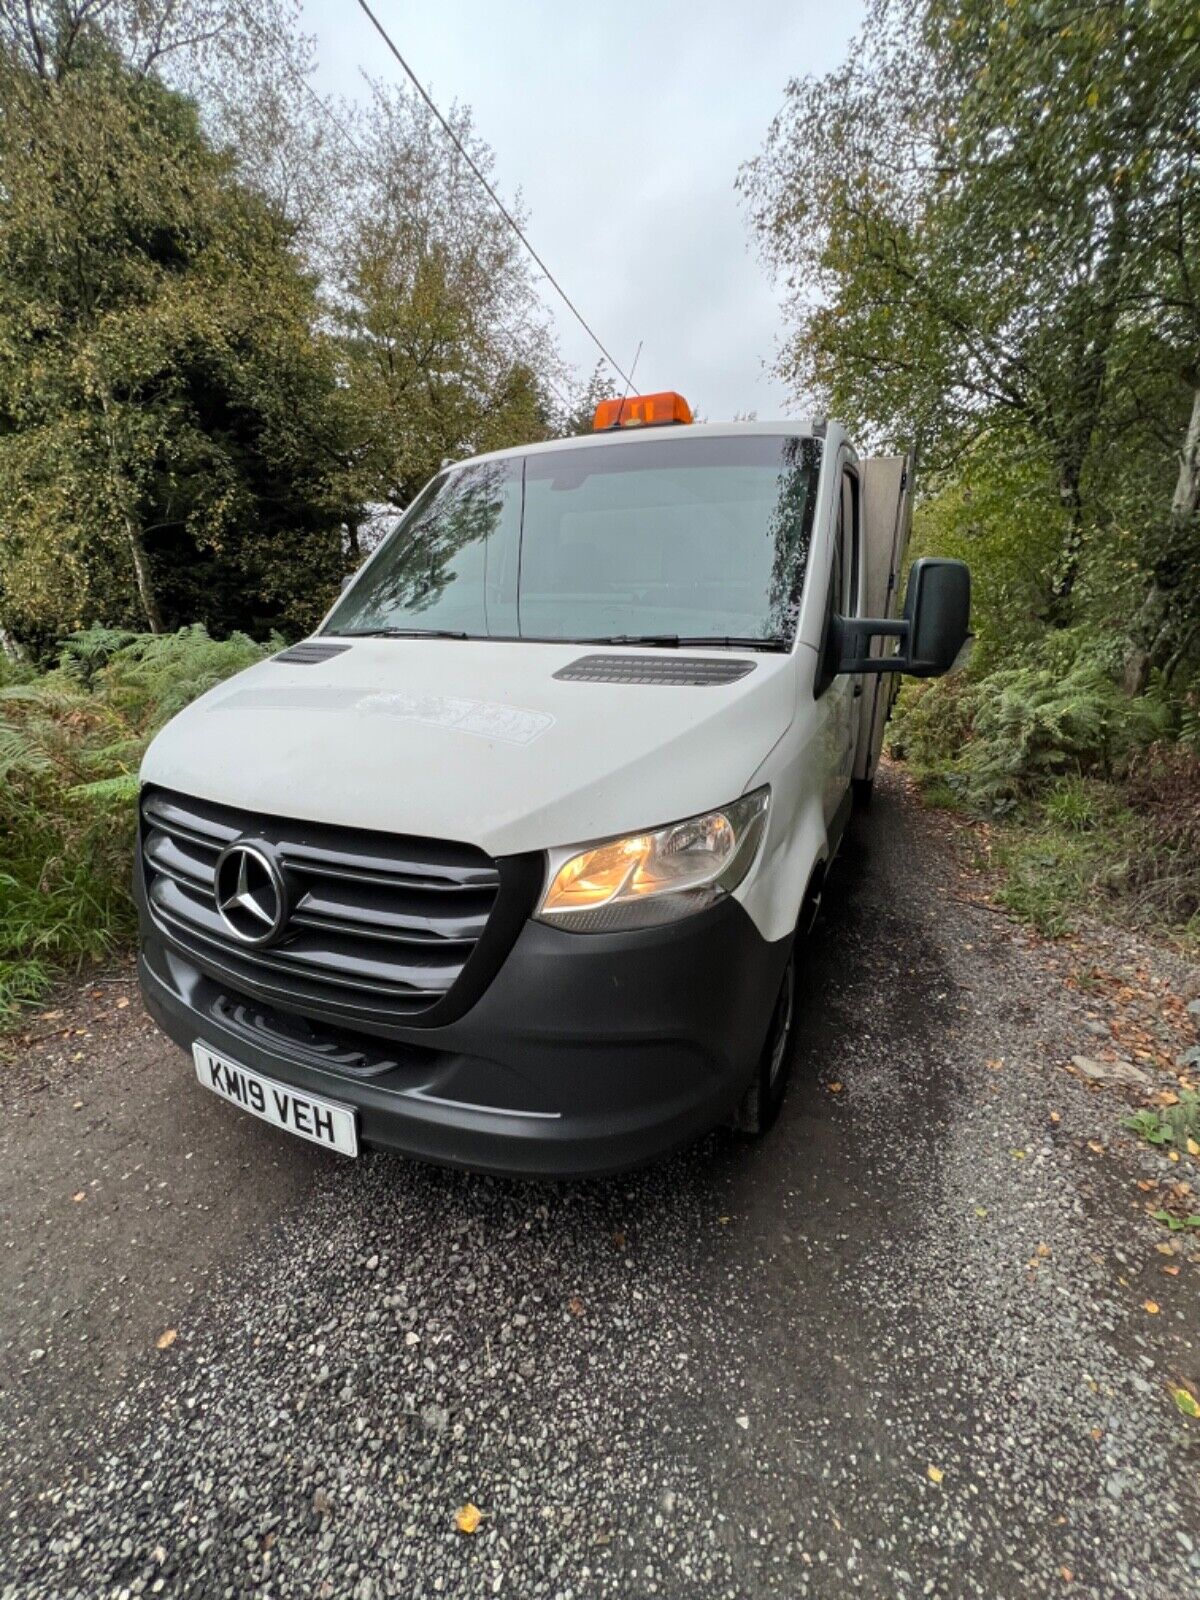 Bid on 2019 MERCEDES SPRINTER TIPPER SINGEL CAB V5- Buy &amp; Sell on Auction with EAMA Group